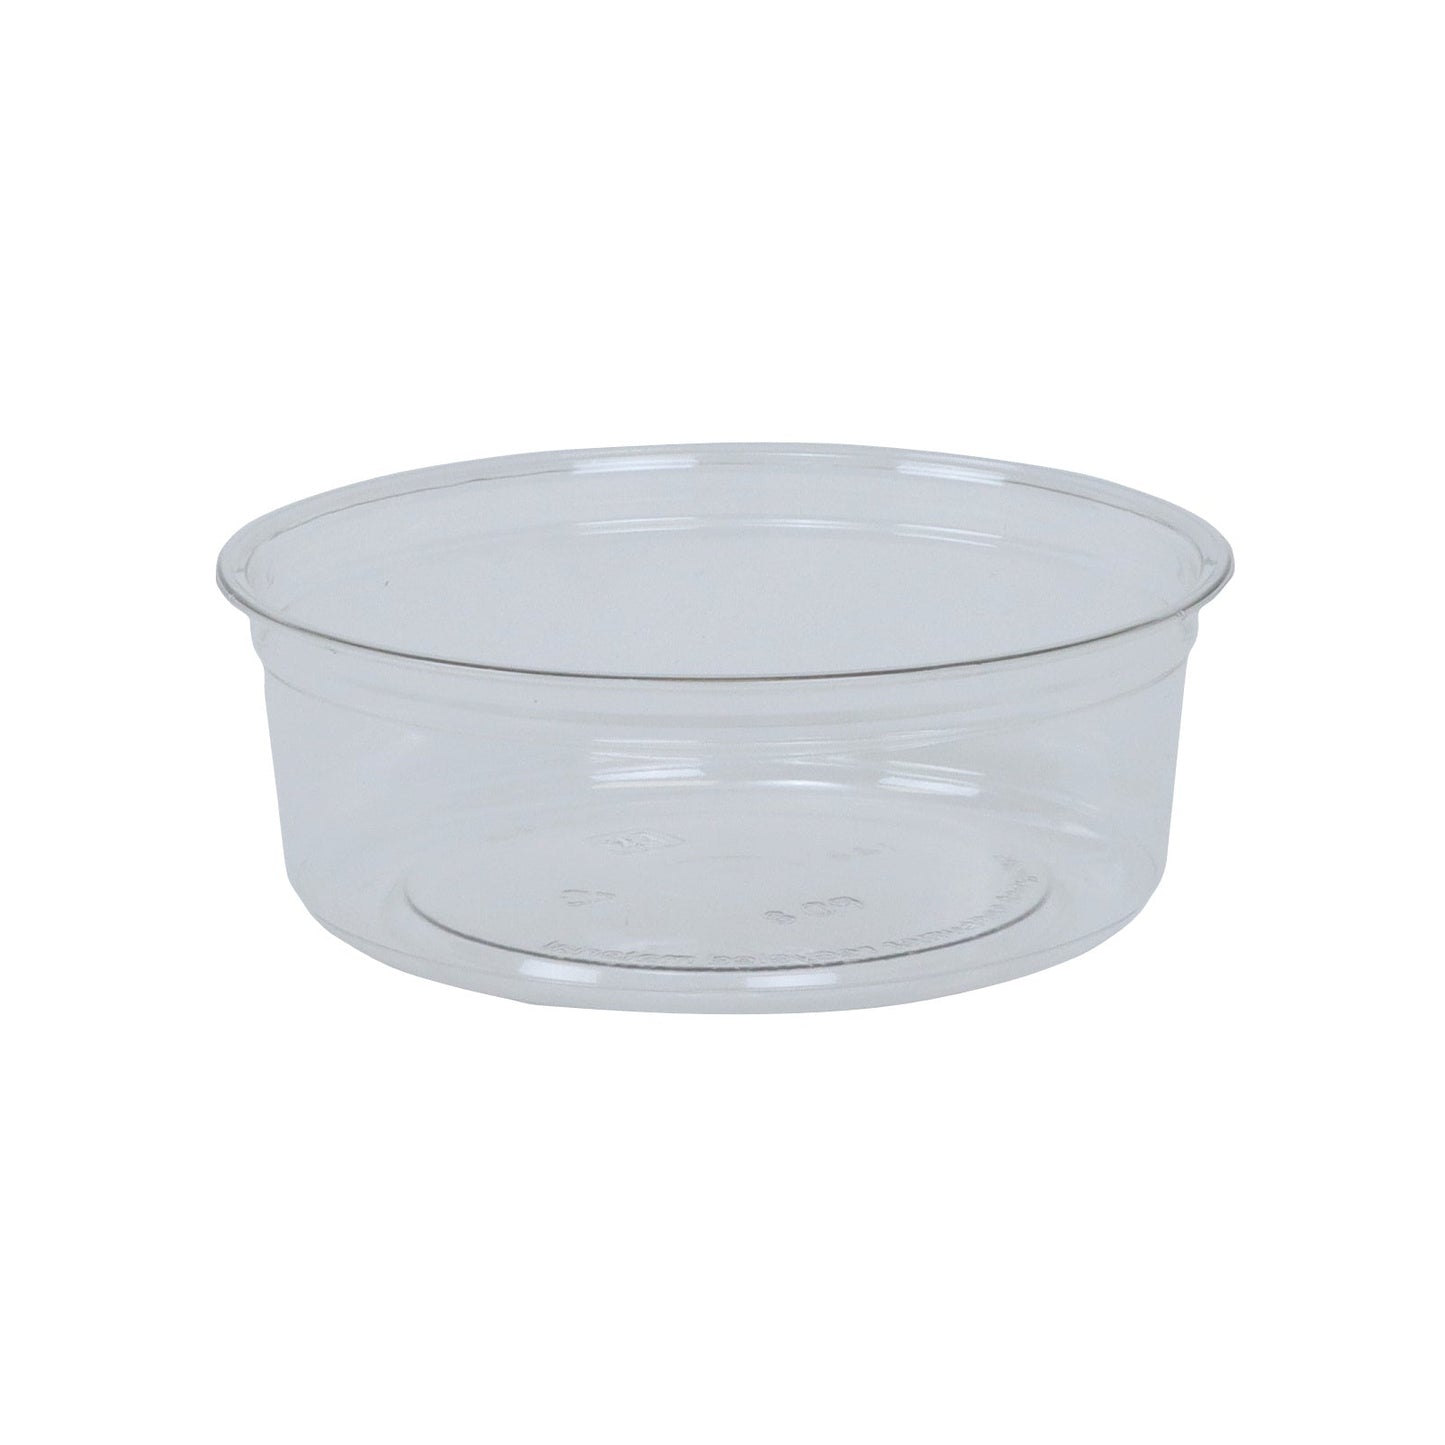 8 oz Deli Container | Recycled Plastic | Made in USA (Pack of 250)